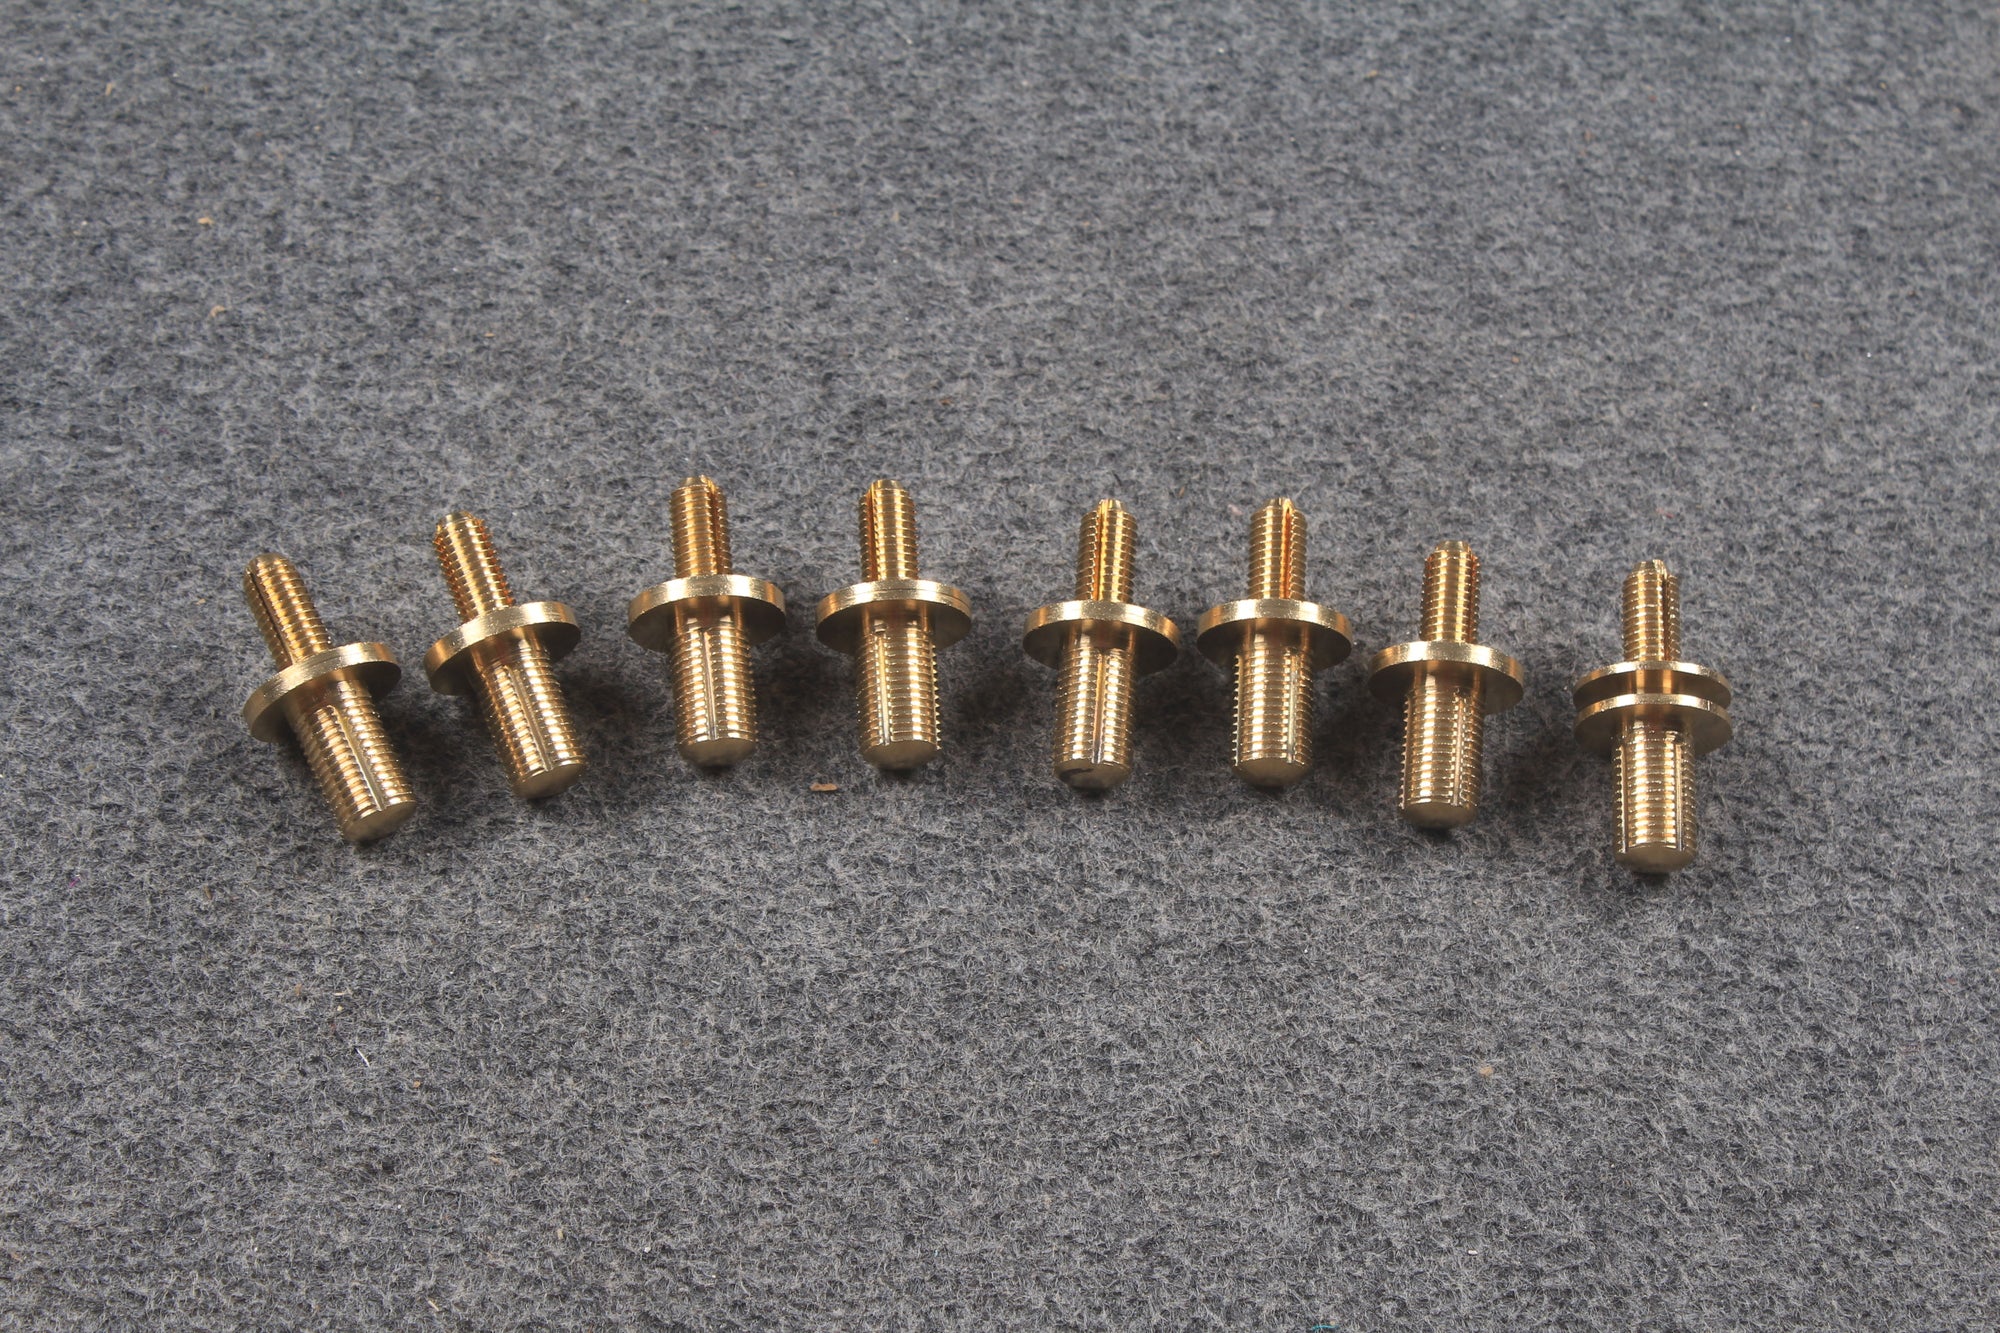 8 pcs brass joint for pool snooker cue quick release / joint 26 mm diameter